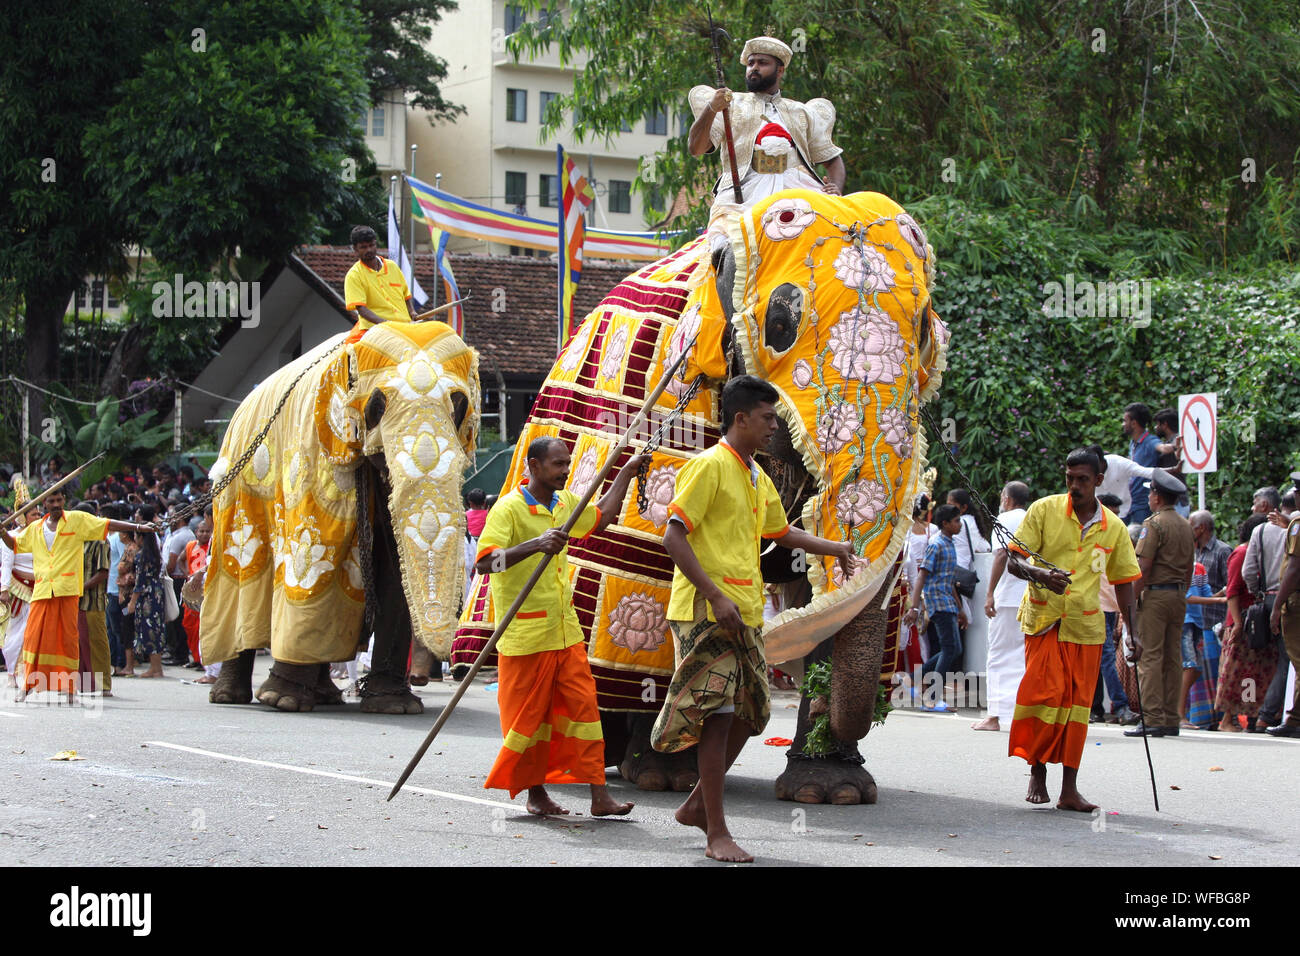 Ceremonial elephants parade along a road during the Buddhist Day Perahera (procession) at Kandy in Sri Lanka. Stock Photo